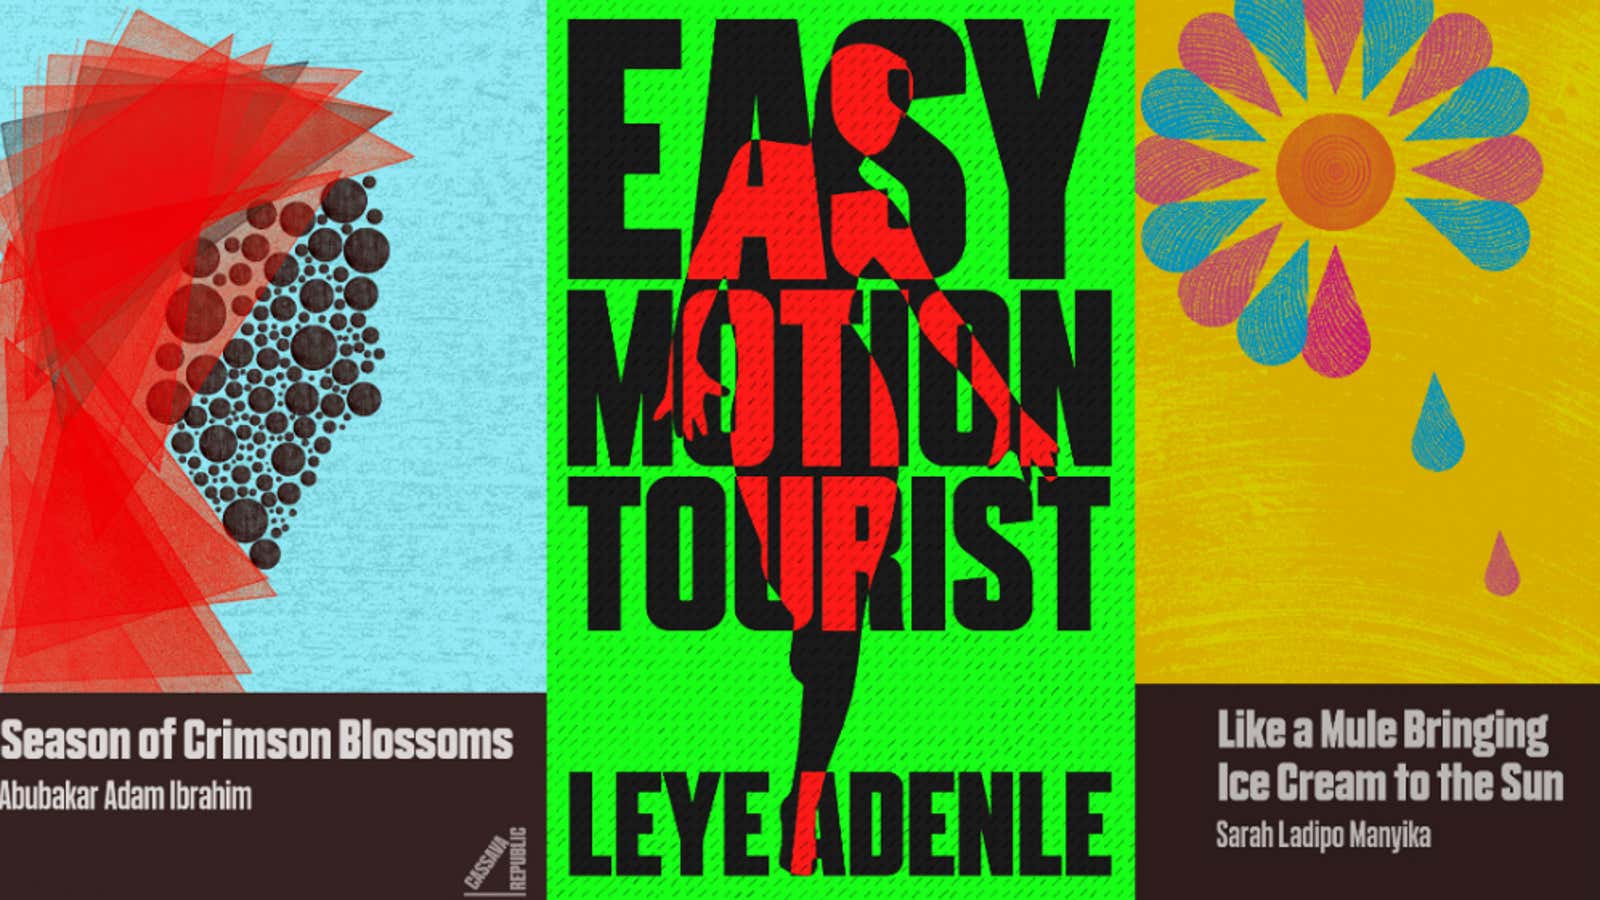 The the first three books Cassava is publishing in the US.